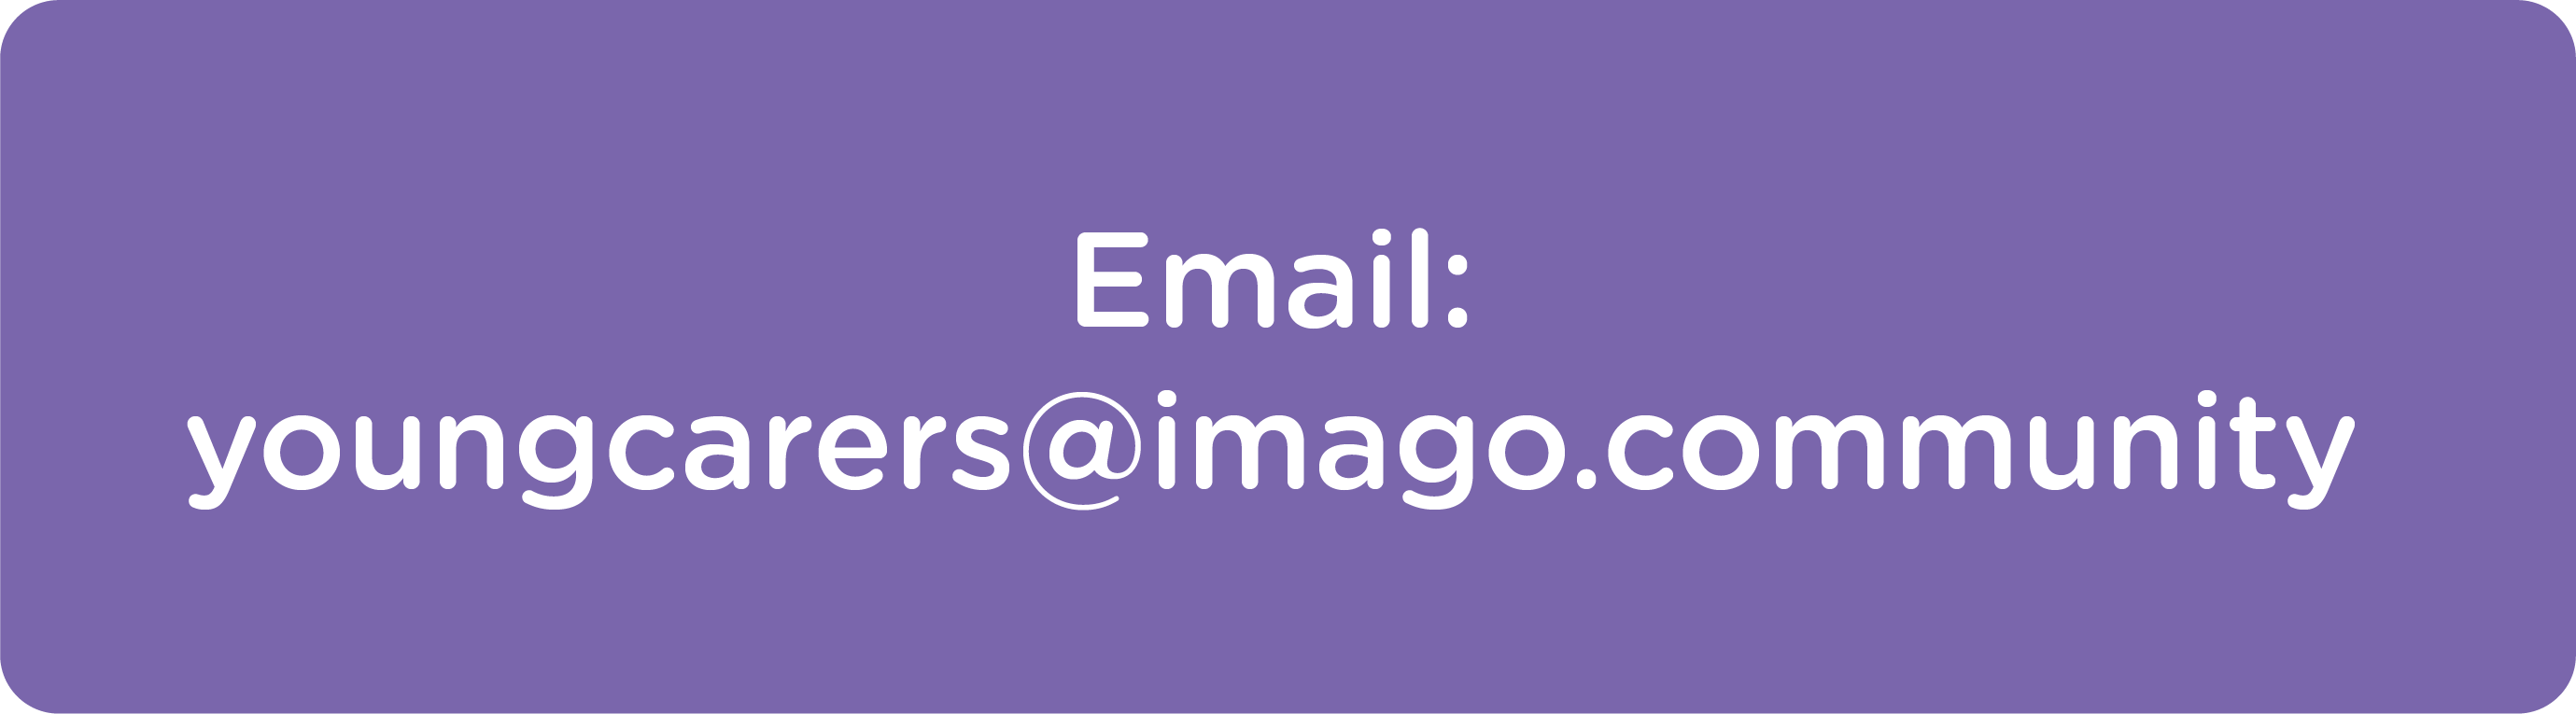 Email Address: youngcarers@imago.community